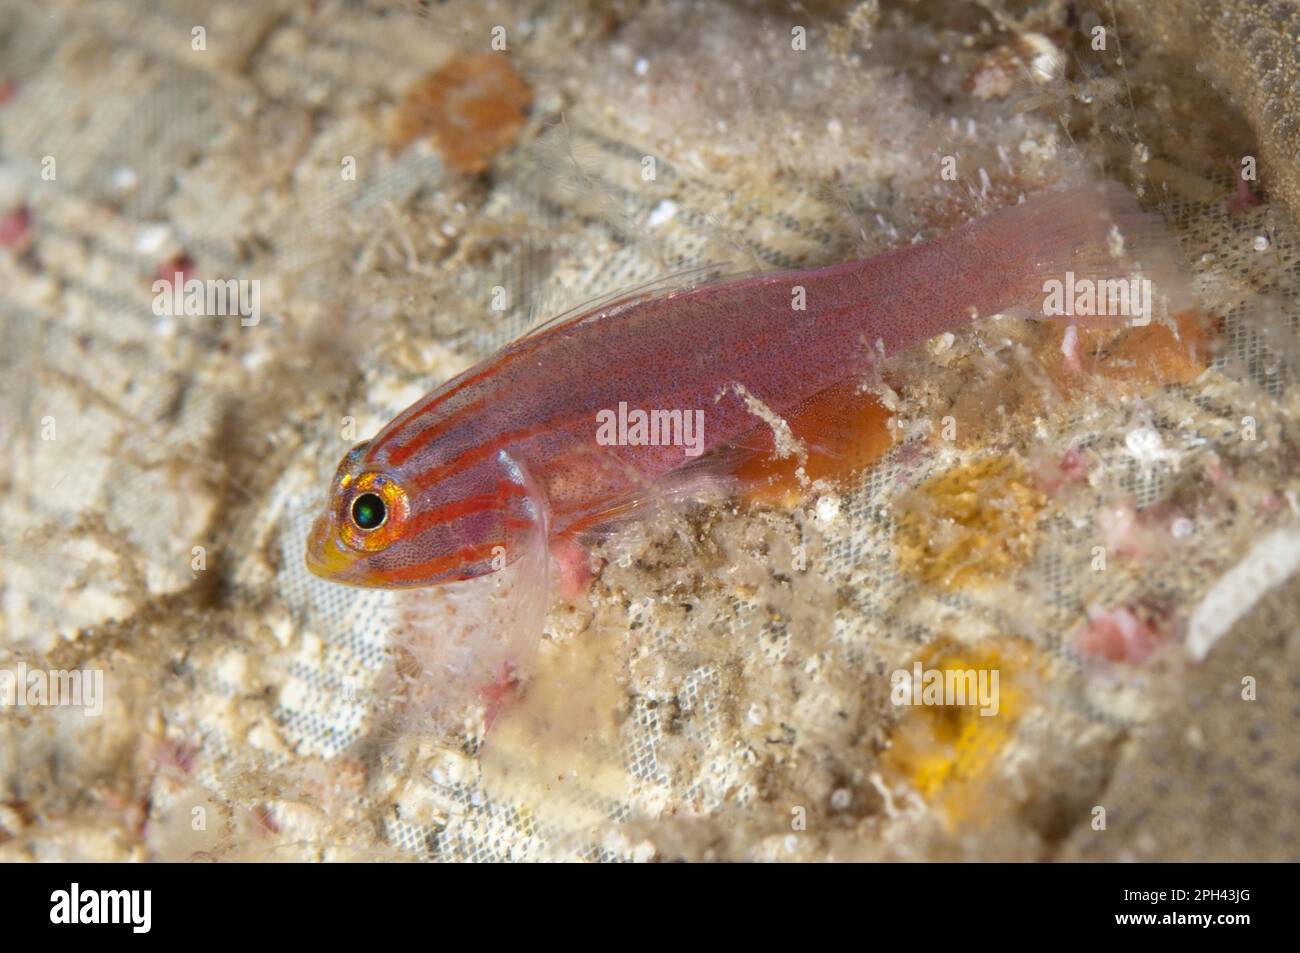 Trimma striata, Head Striped Goby, Head Striped Goby, Coral Goby, Coral Gobies, Other Animals, Fish, Animals, Gobies, Stripedhead Dwarfgoby (Trimma Stock Photo